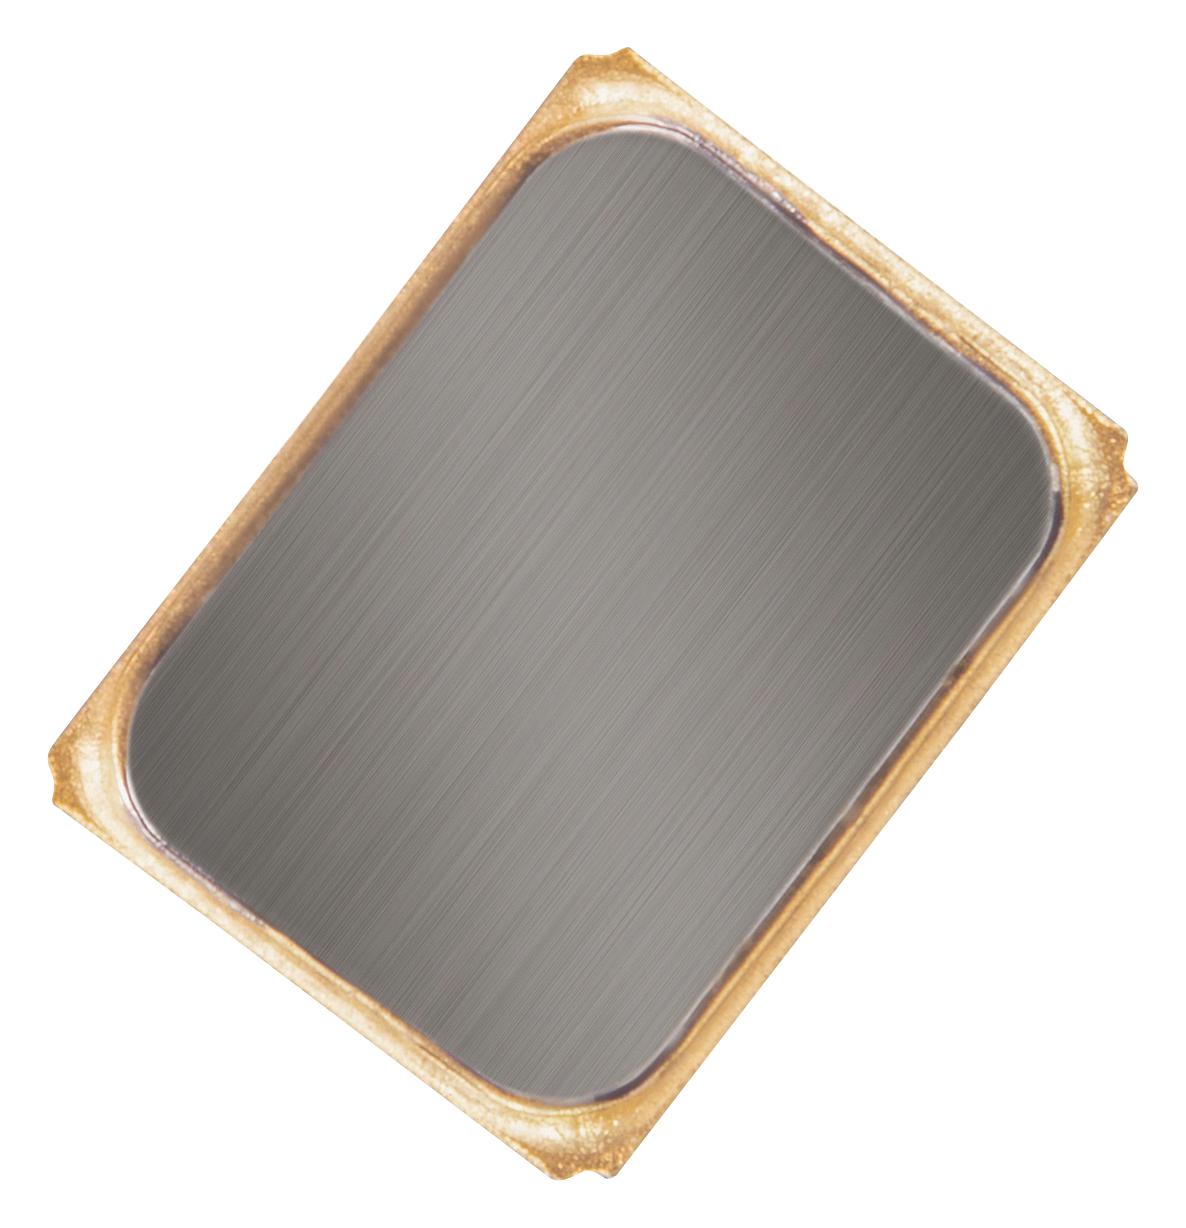 Raltron R2016-32.000-8-F-1010-Ext-Tr Crystal, 32Mhz, 8Pf, Smd, 2mm X 1.6mm